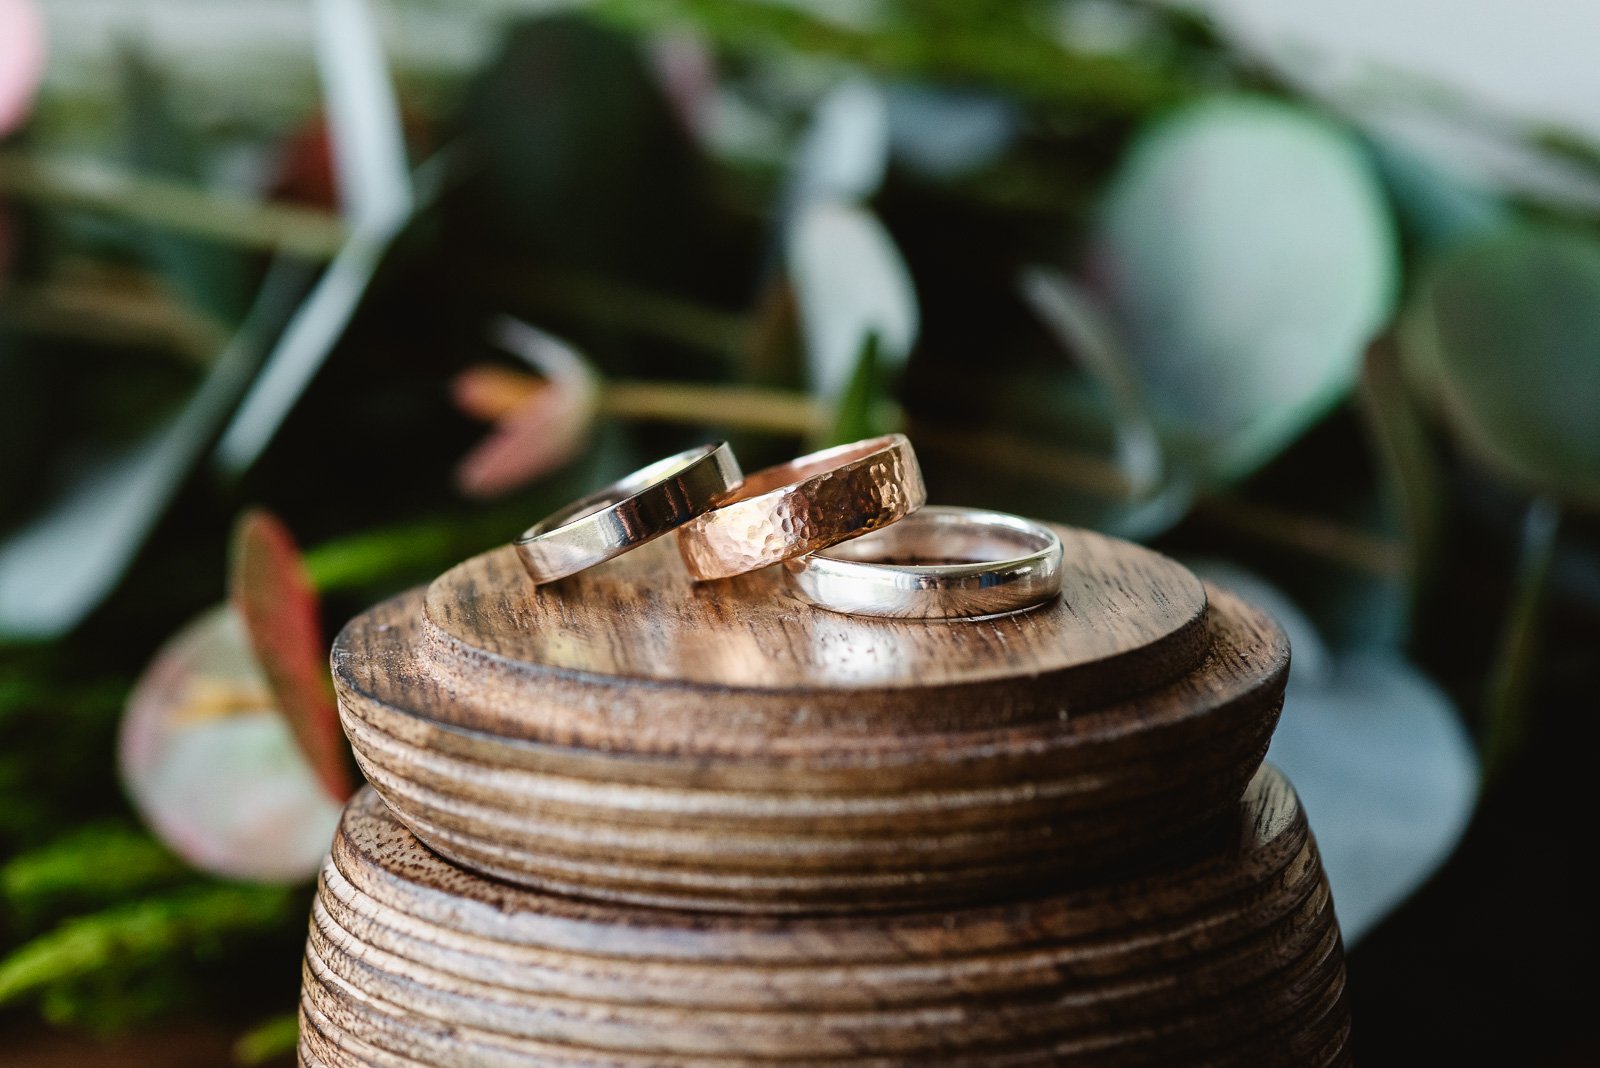  Ethical, modern wedding bands in gold, silver and rose gold with handmade detailing adding shimmer and texture.  Photo by: Fiona Kelly 